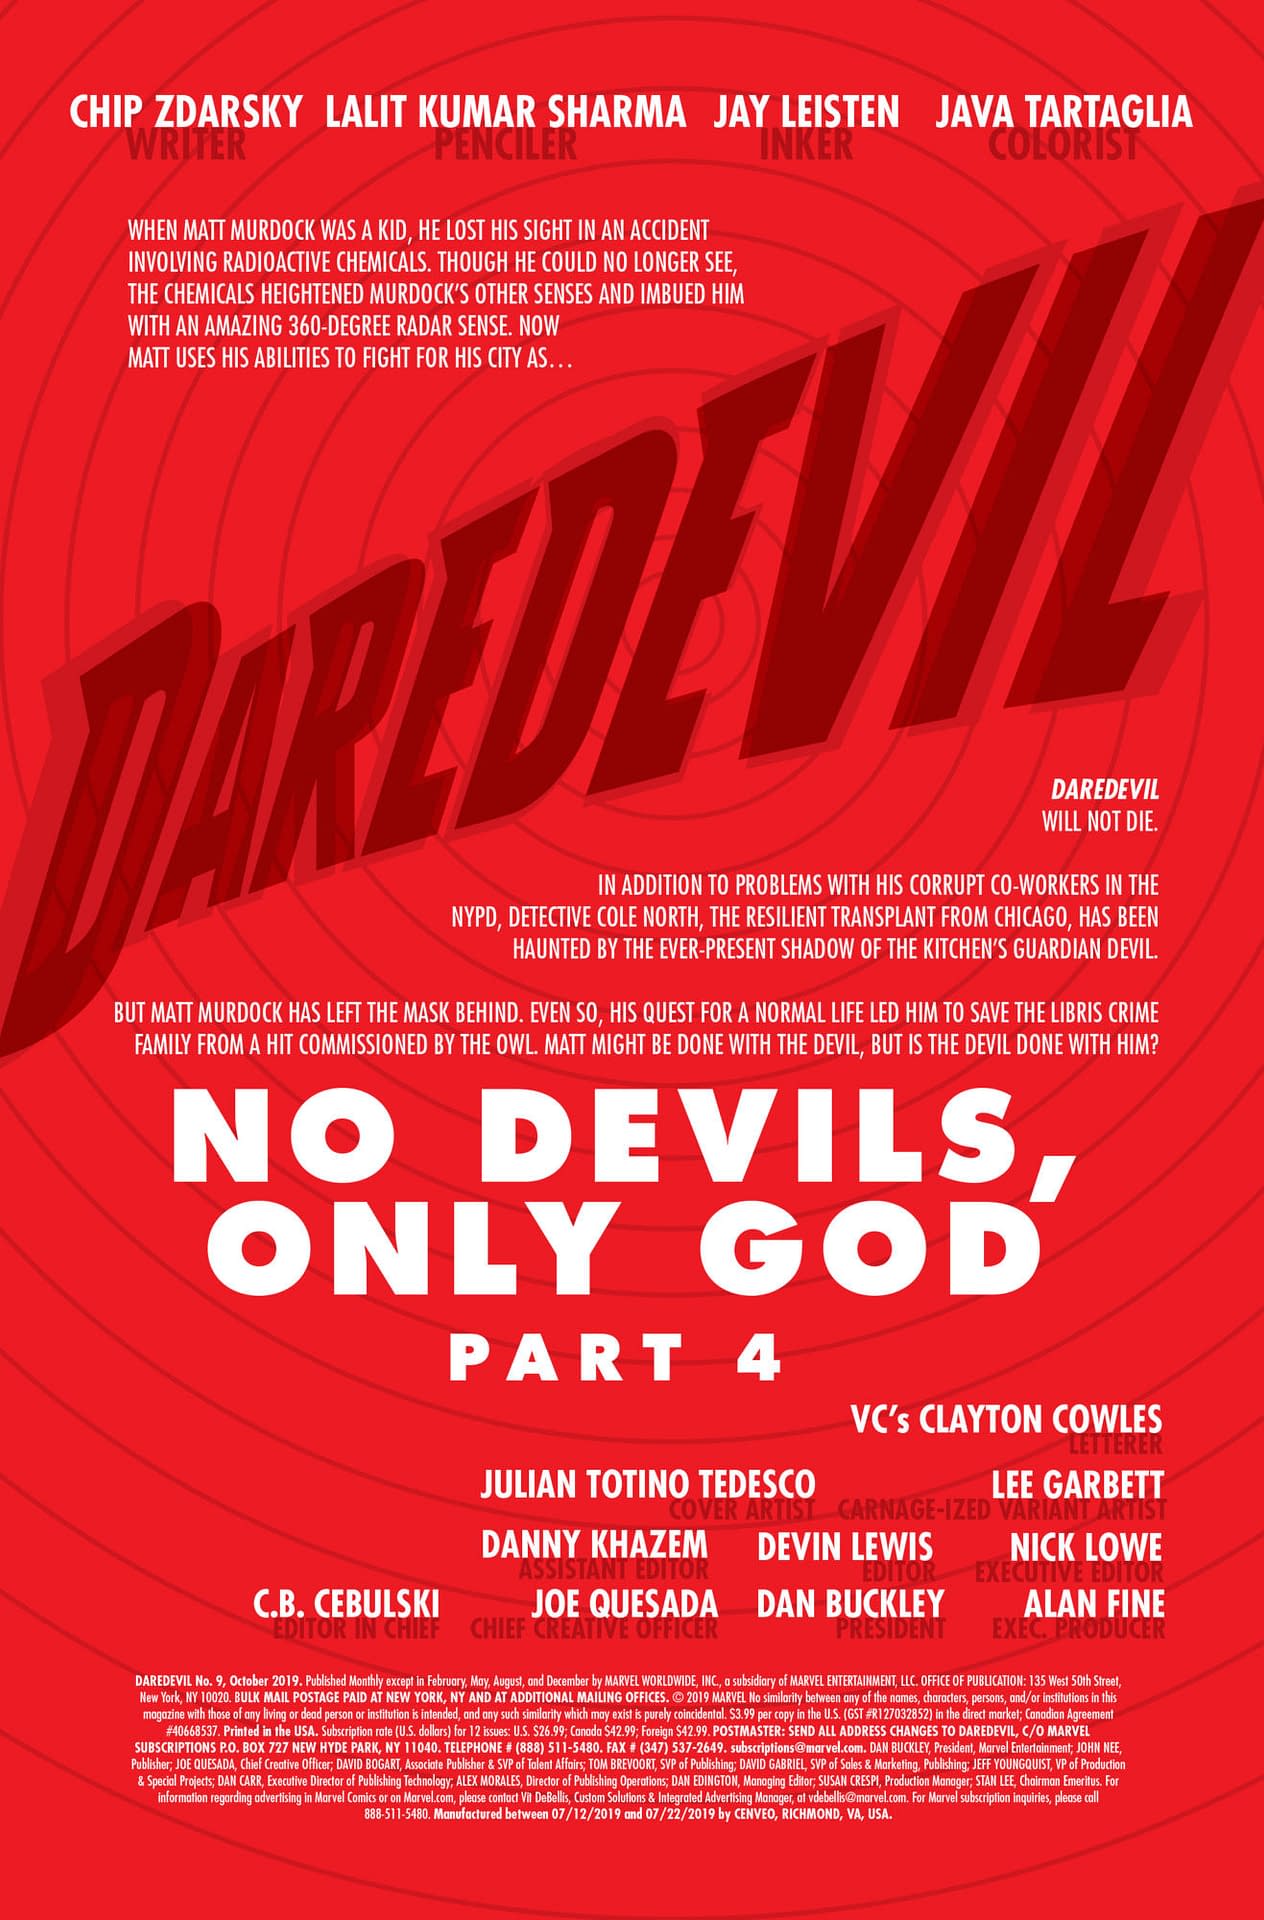 Does God Exist? Reed Richards Reveals All in Daredevil #9